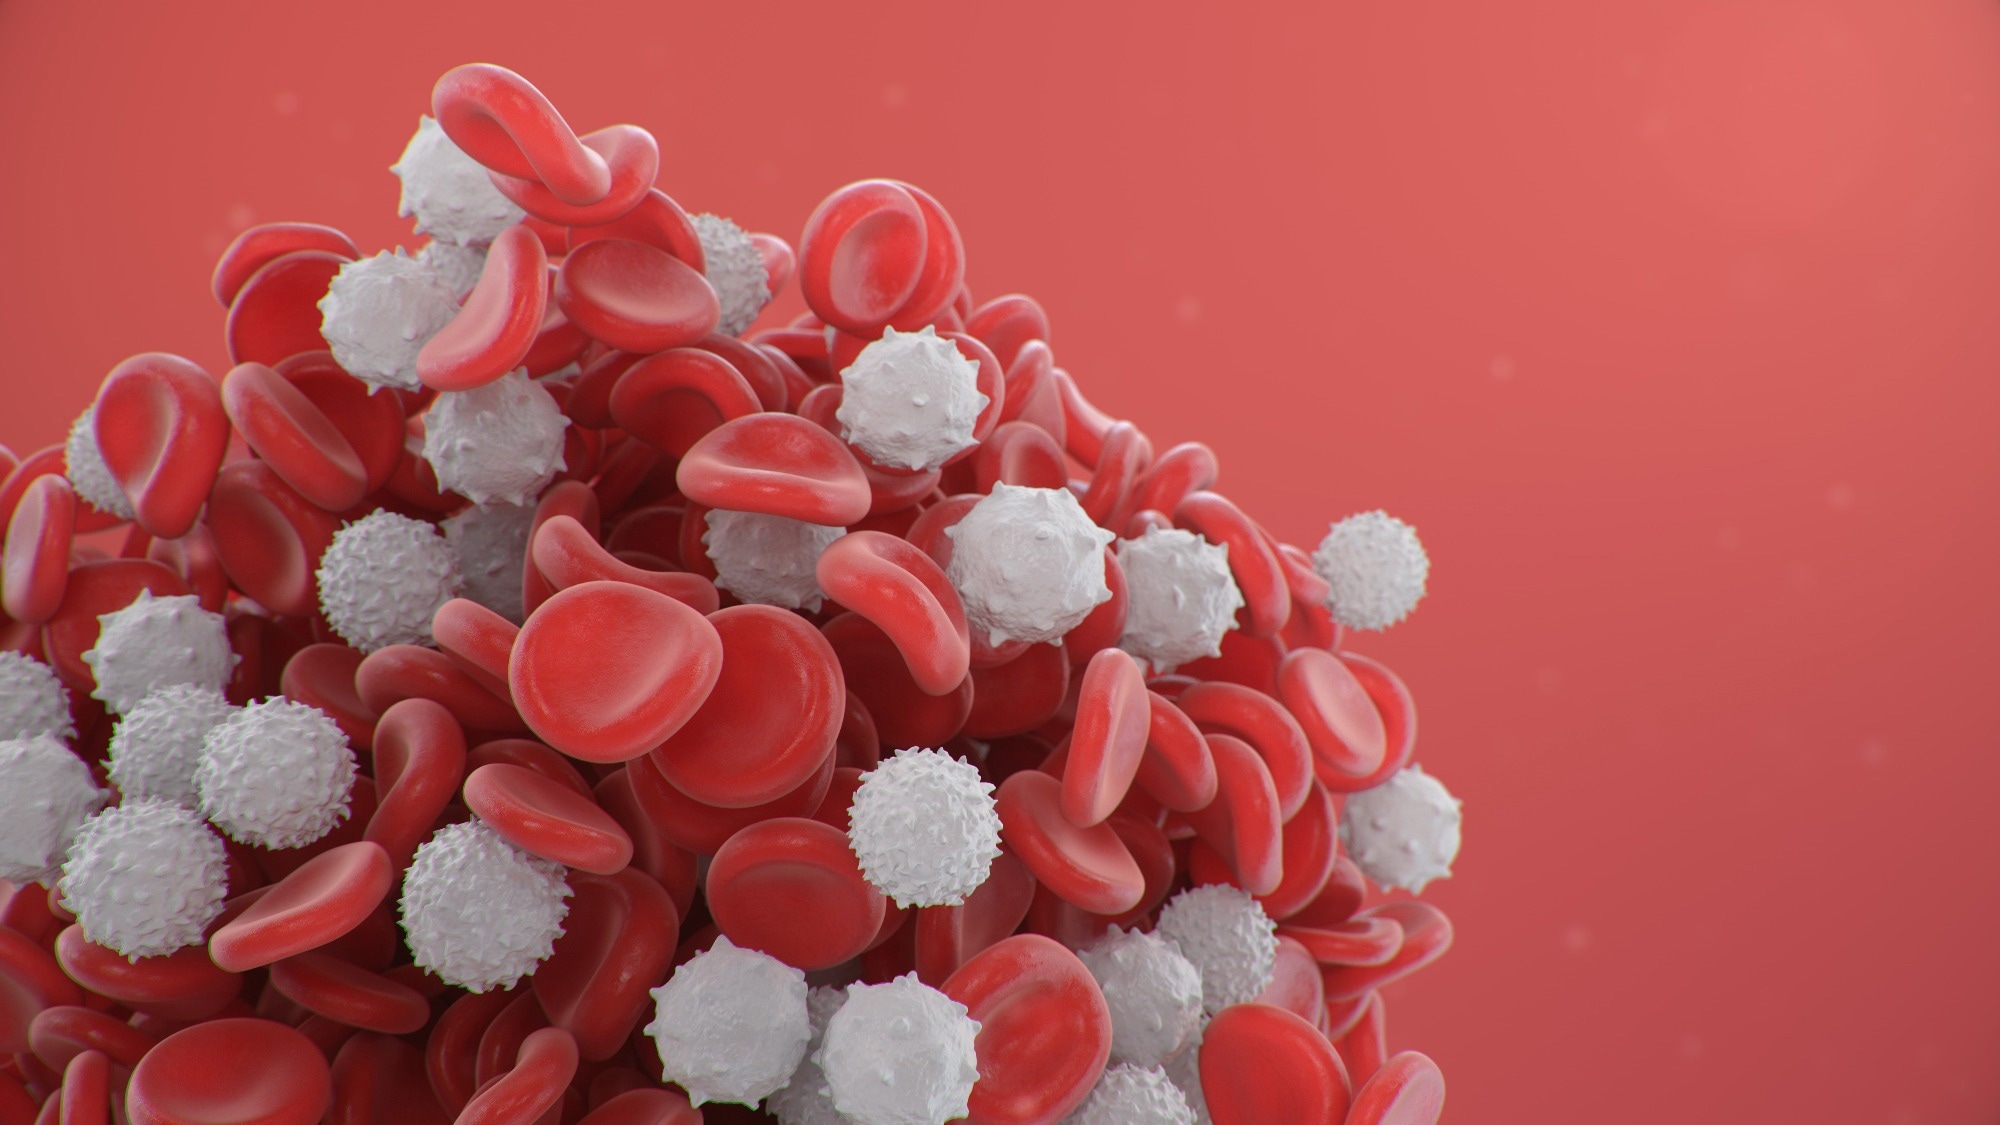 Small-molecule A485 mobilizes white blood cells on demand